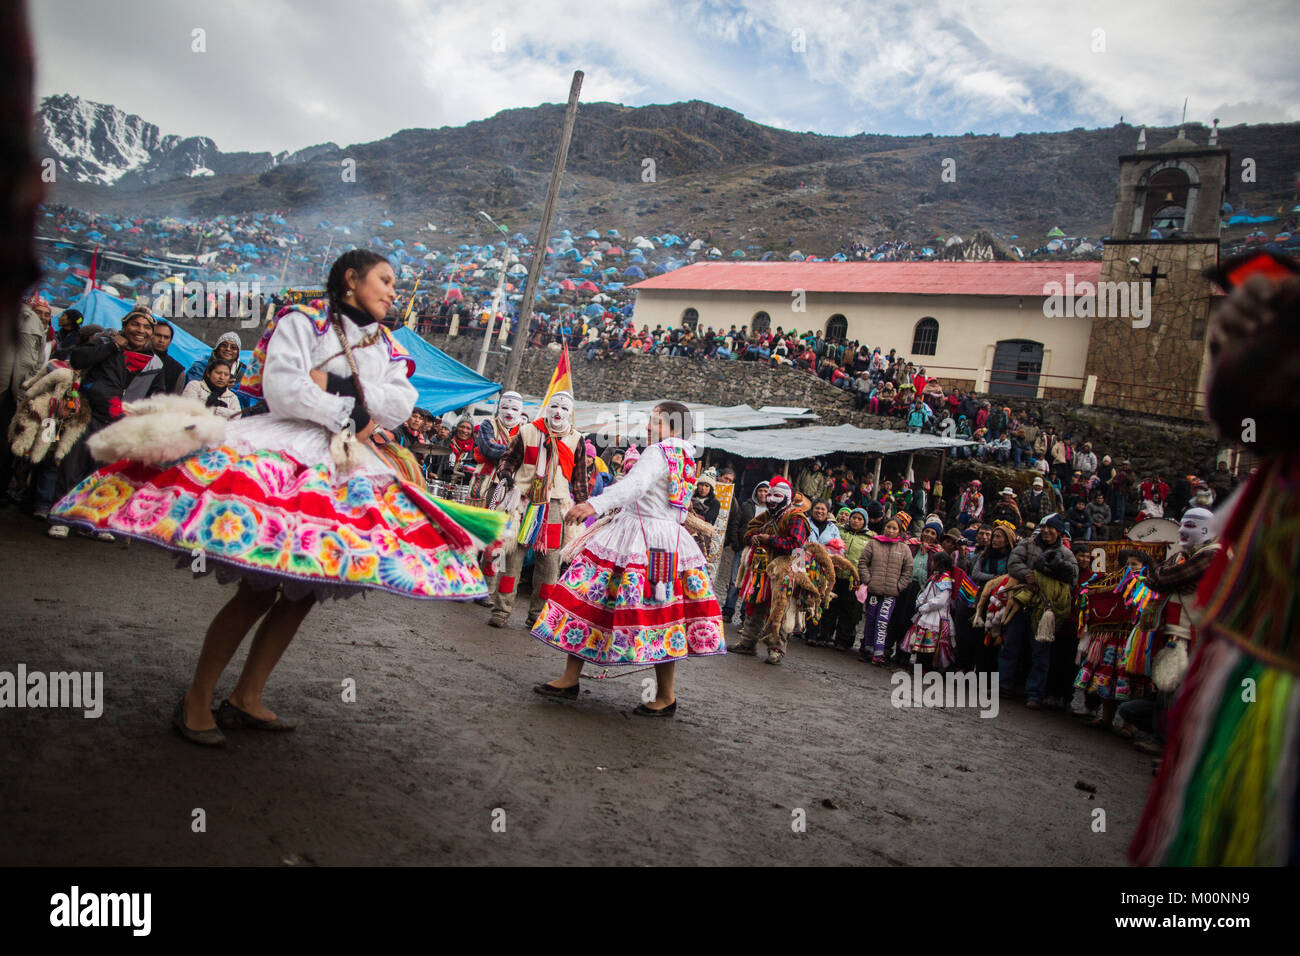 Cusco, Peru. 29th Dec, 2017. The main day in Qoyllurit'i is a true celebration, after having climbed the mountains and having waited for the sunrise in an ancestral ritual, the devotees, dancers and ukukus (guardians of the Lord of Qoyllurit'i) descend to the esplanade where the temple remains In total there are more than 500 dances that participate in this custom, all belonging to the so-called nations, which are groups of parishioners who gather in different parts of the region to make a pilgrimage to the sanctuary.Quyllur Rit'i or Star Snow Festival is a spiritual and religious festiv Stock Photo